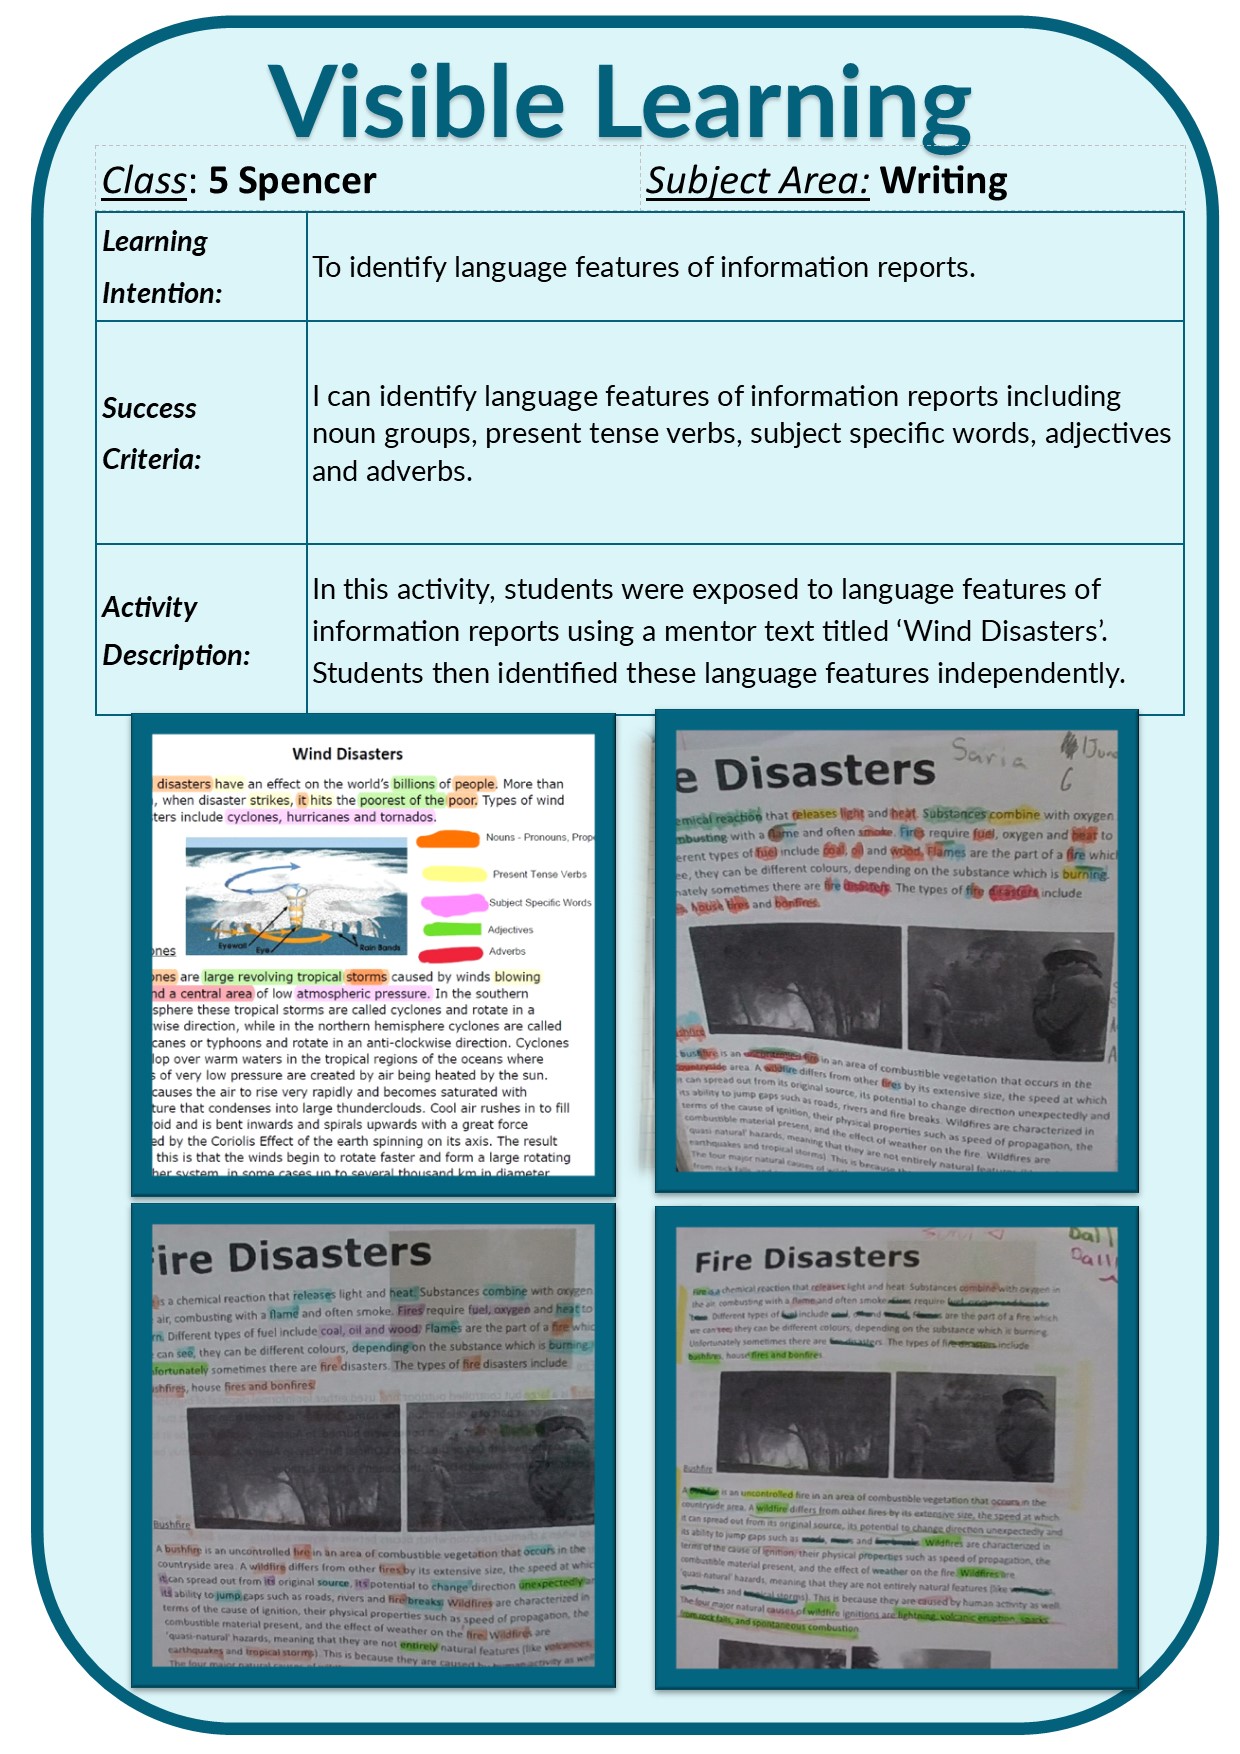 Visible Learning/5S Term 2 Week 8 - Writing.jpg